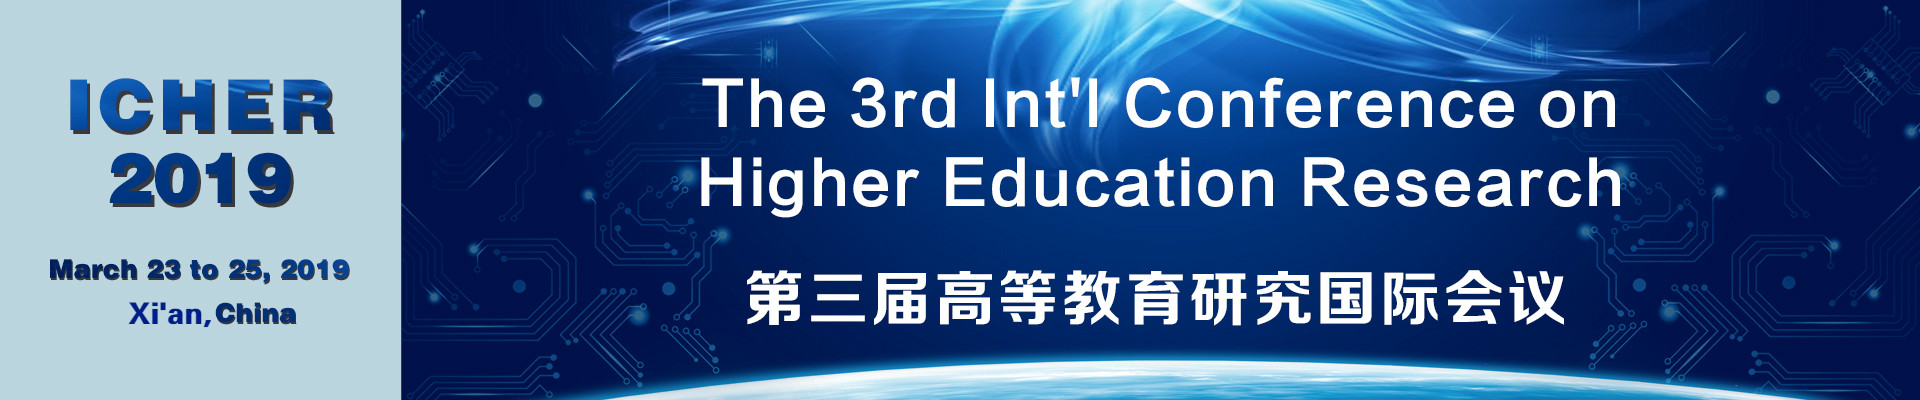 The 3rd Int'l Conference on Higher Education Research (ICHER 2019), Xi'an, Shanxi, China